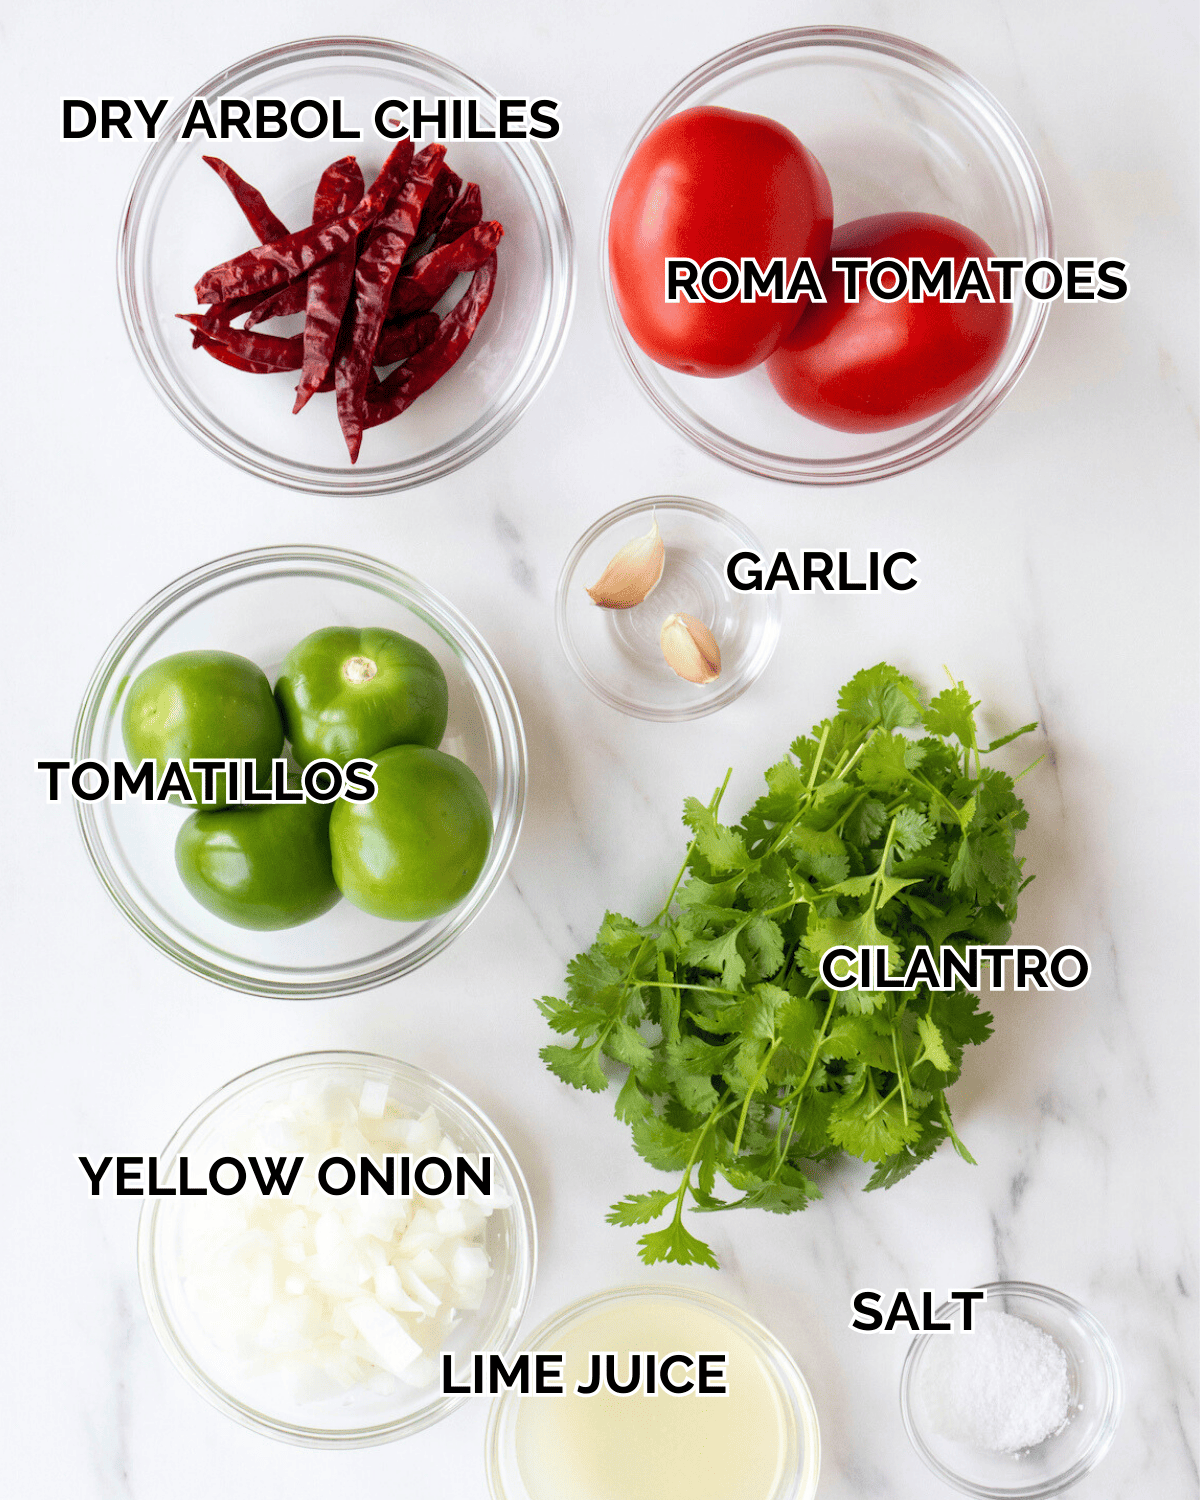 Ingredient shot of each ingredient in individual clear bowls such as Roma tomatoes, dry arbol chiles, tomatillos, garlic cloves, cilantro, yellow onion, lime juice, and salt on a white countertop. 